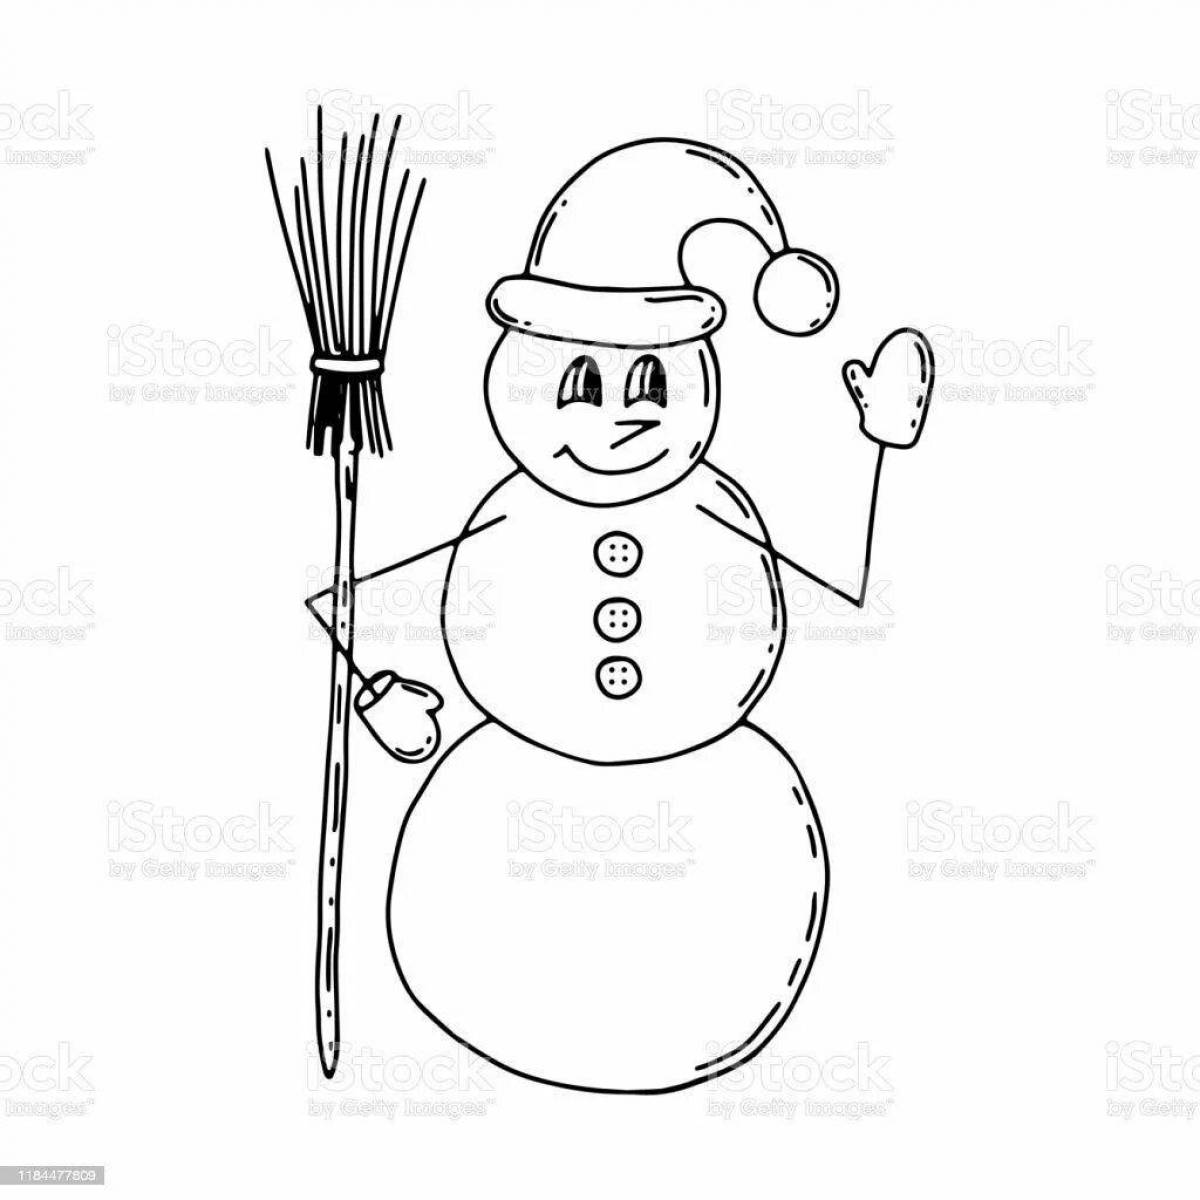 Crazy coloring of a snowman with a broom